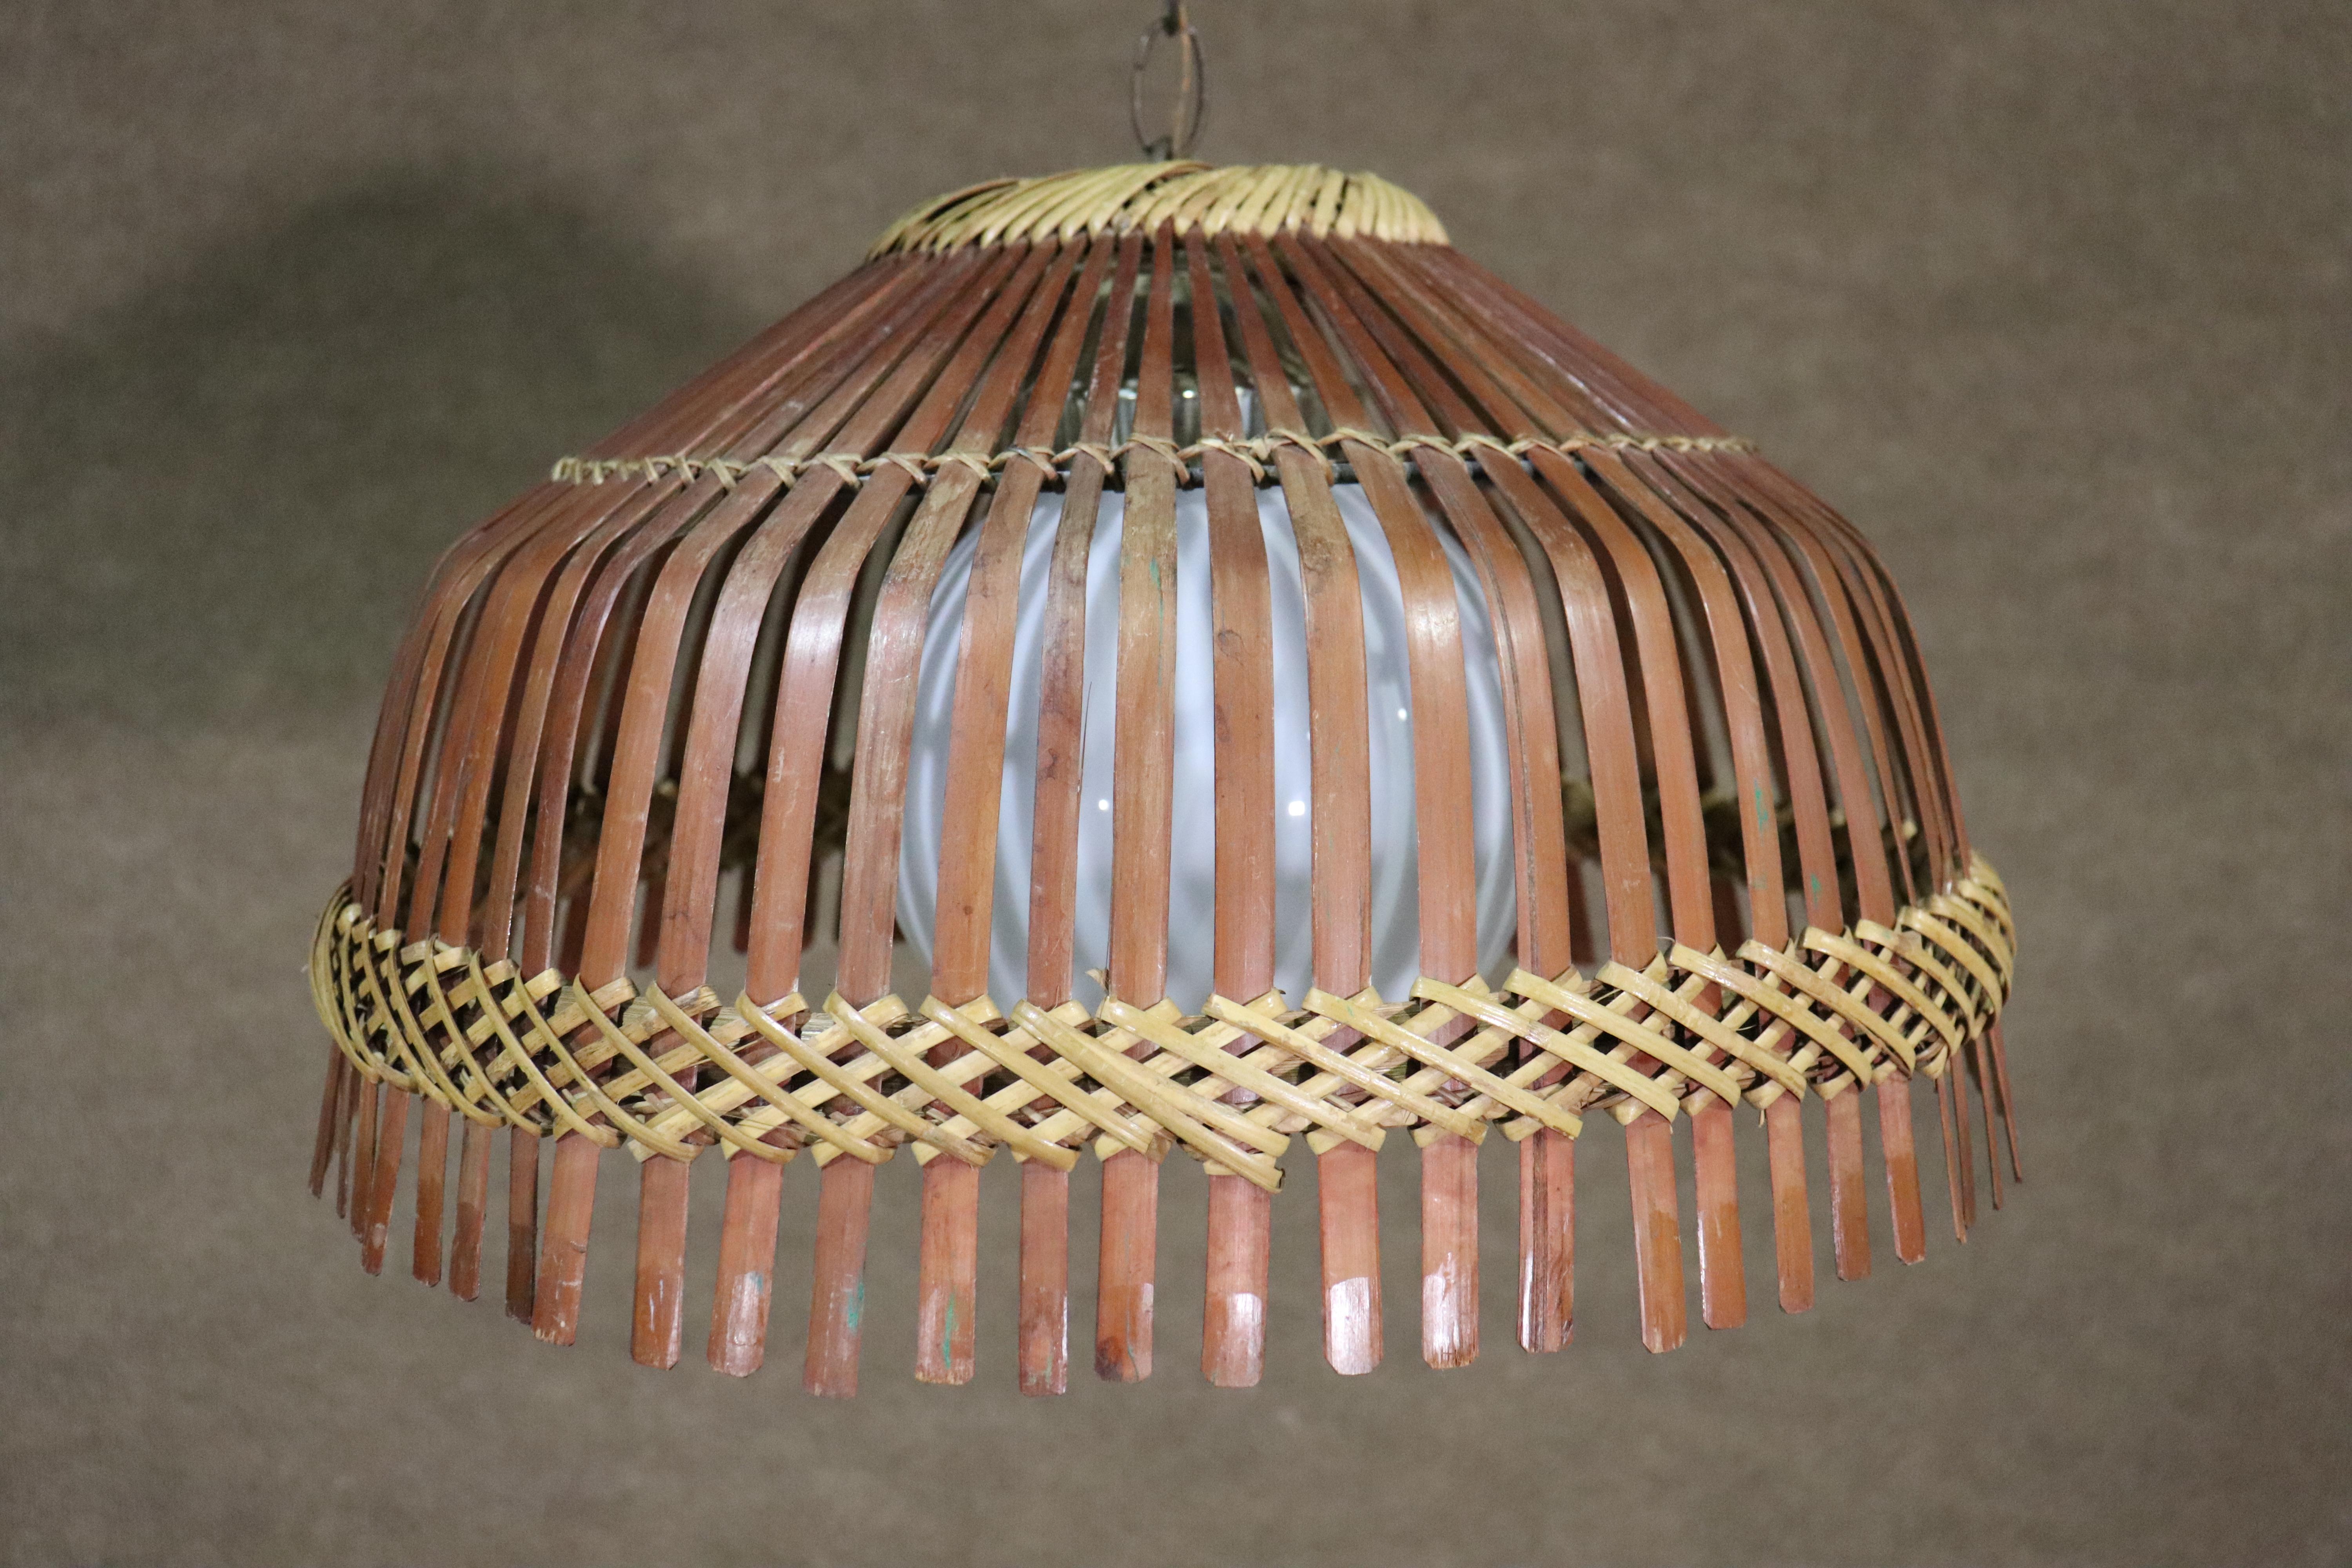 Vintage hanging lamp with wide split rattan shade, with woven wicker. Large milk glass globe holds a single bulb.
Please confirm location NY or NJ